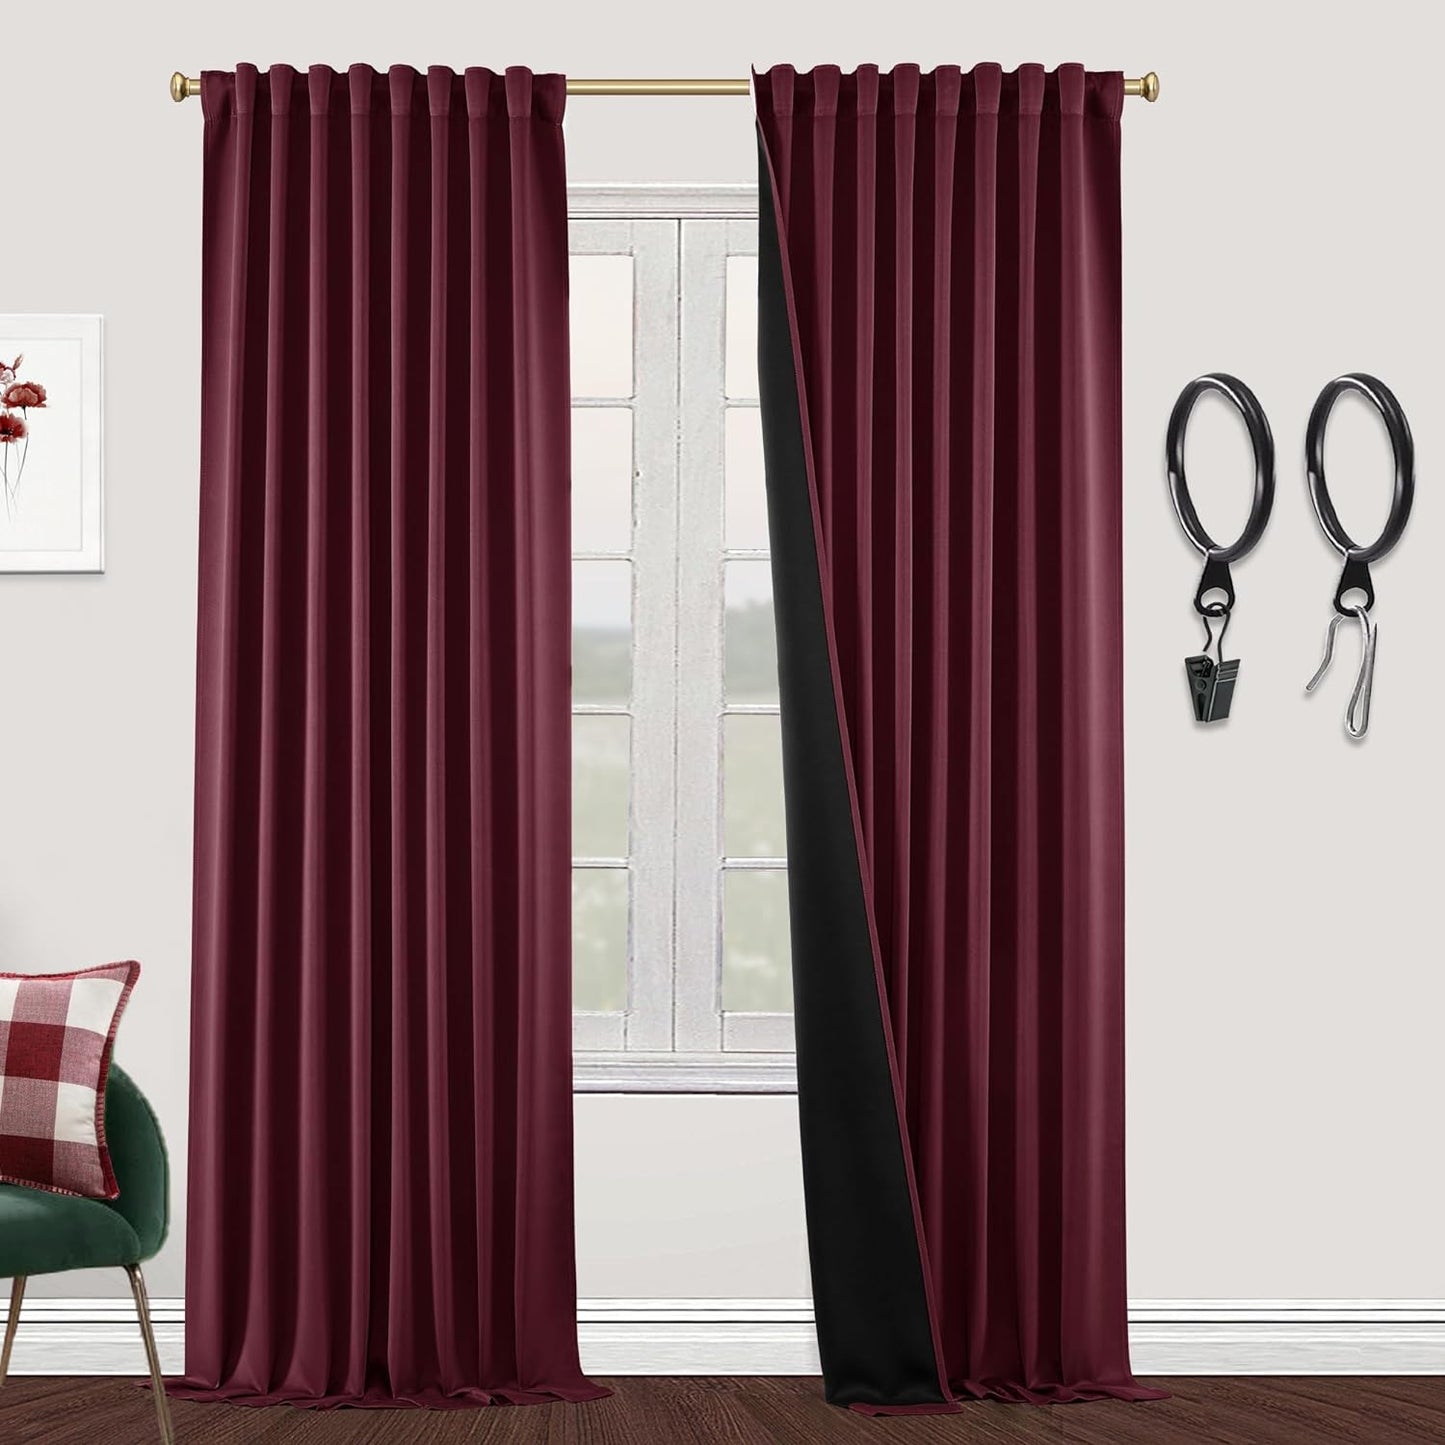 SHINELAND Beige Room Darkening Curtains 105 Inches Long for Living Room Bedroom,Cortinas Para Cuarto Bloqueador De Luz,Thermal Insulated Back Tab Pleat Blackout Curtains for Sunroom Patio Door Indoor  SHINELAND Burgundy Red 2X(52"Wx96"L) 